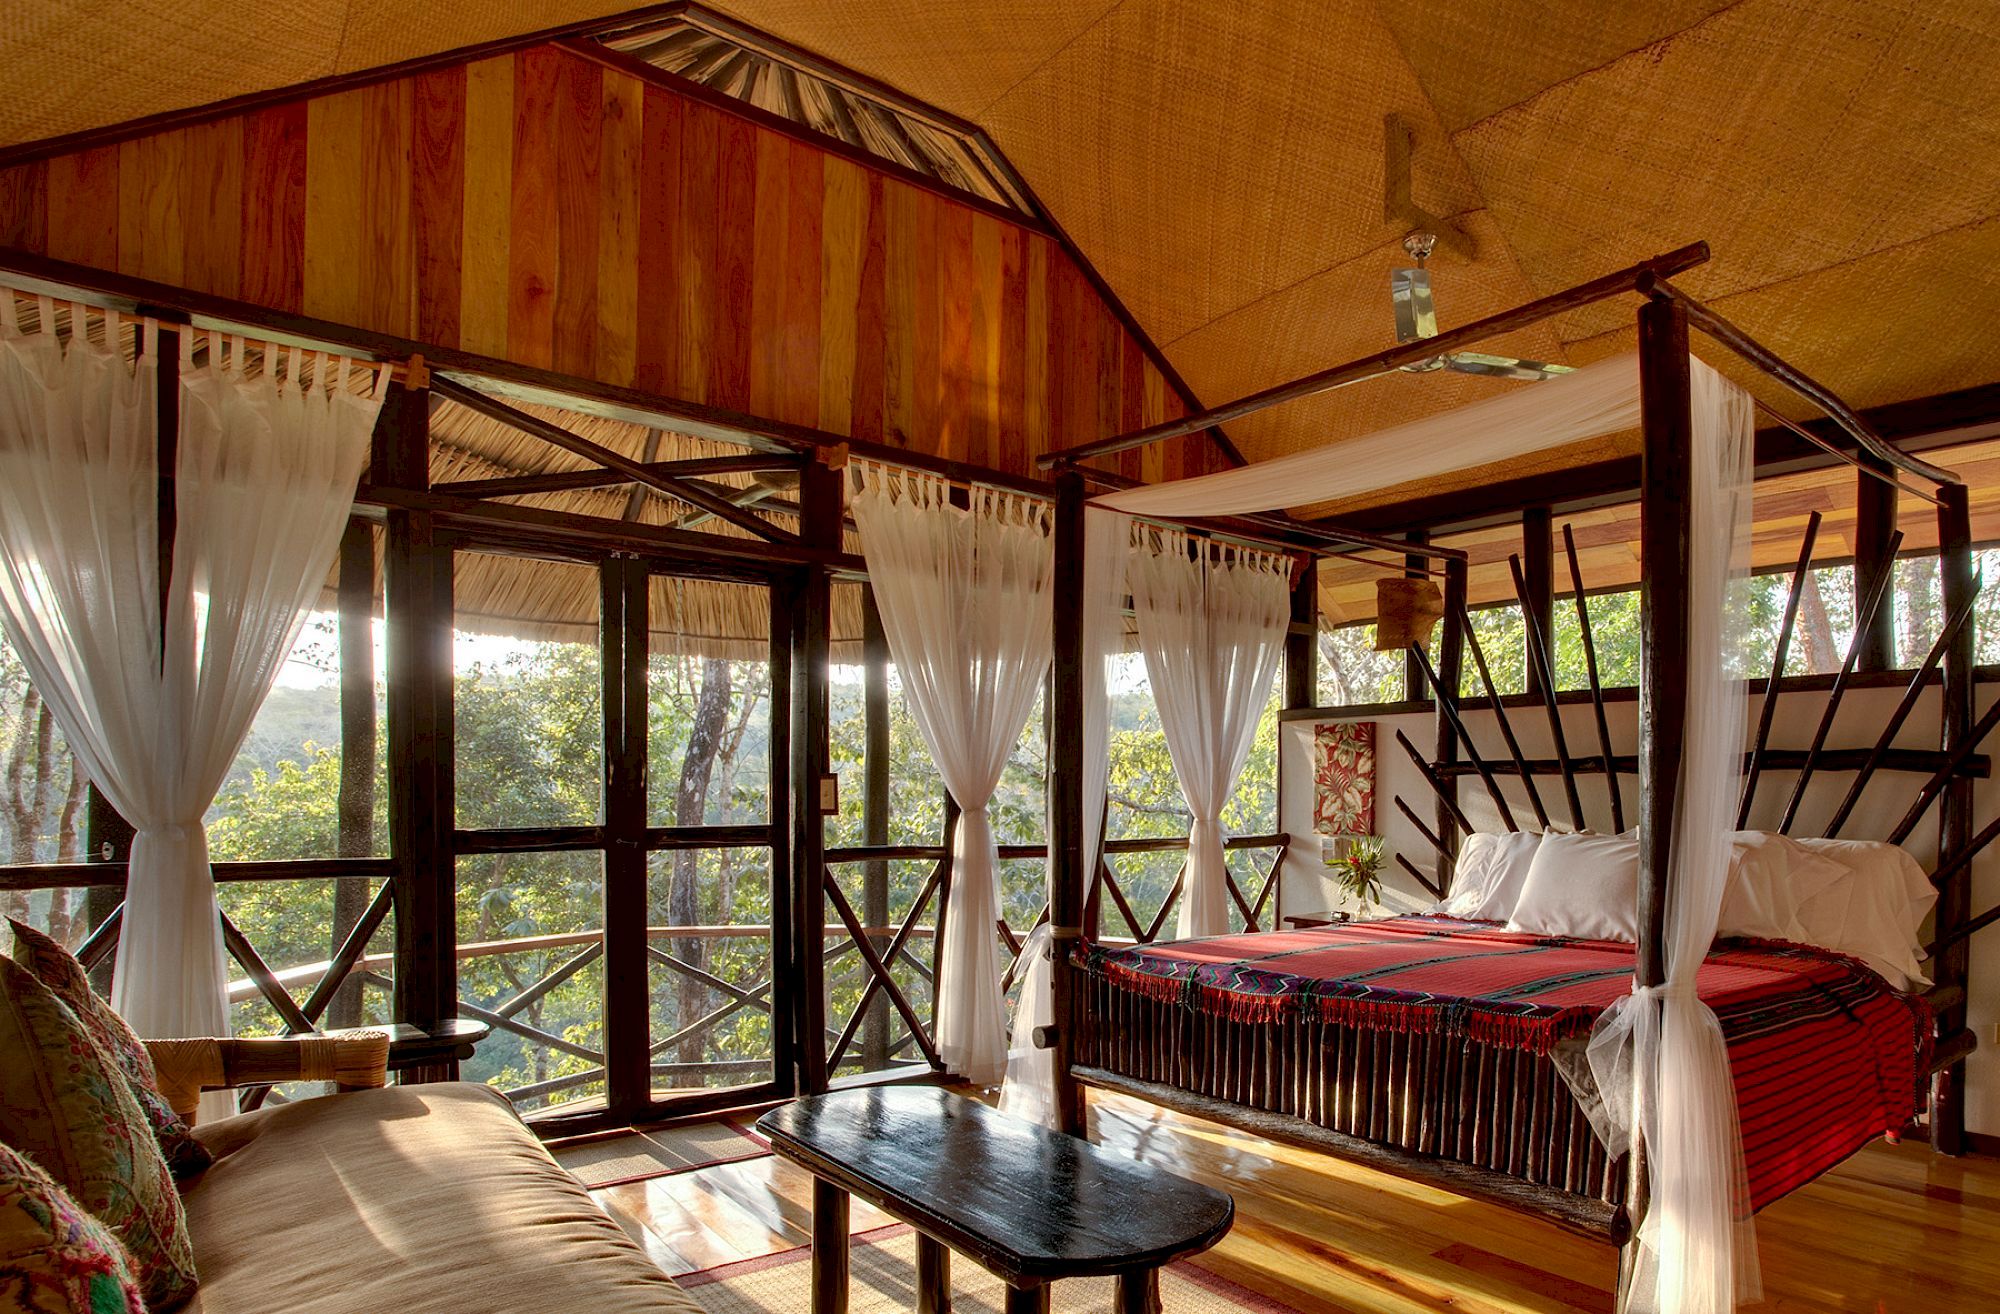 The image shows a cozy rustic bedroom with a four-poster bed, wooden walls, and large windows offering a scenic forest view.